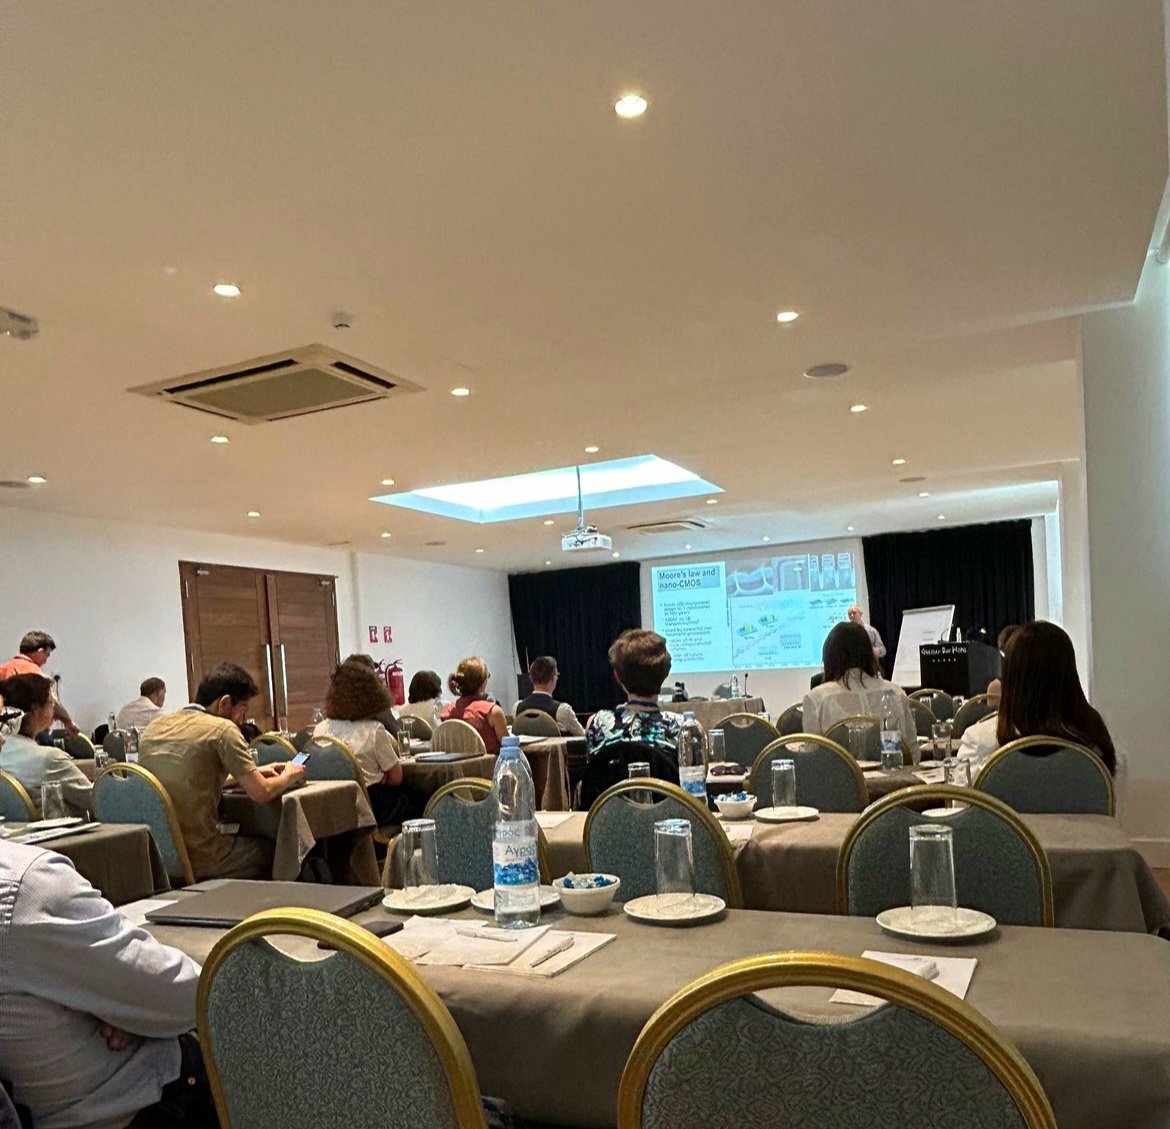 2nd day of the 'The 1st International Symposium on #Digital #Twins in #Healthcare' taking place in Ayia Napa, #Cyprus.
👉 Presentation by Mrs Terpsithea Kittou representing the @eHealthcy in the special session 'Presentation and Discussion on the position paper. 
👉 Towards a